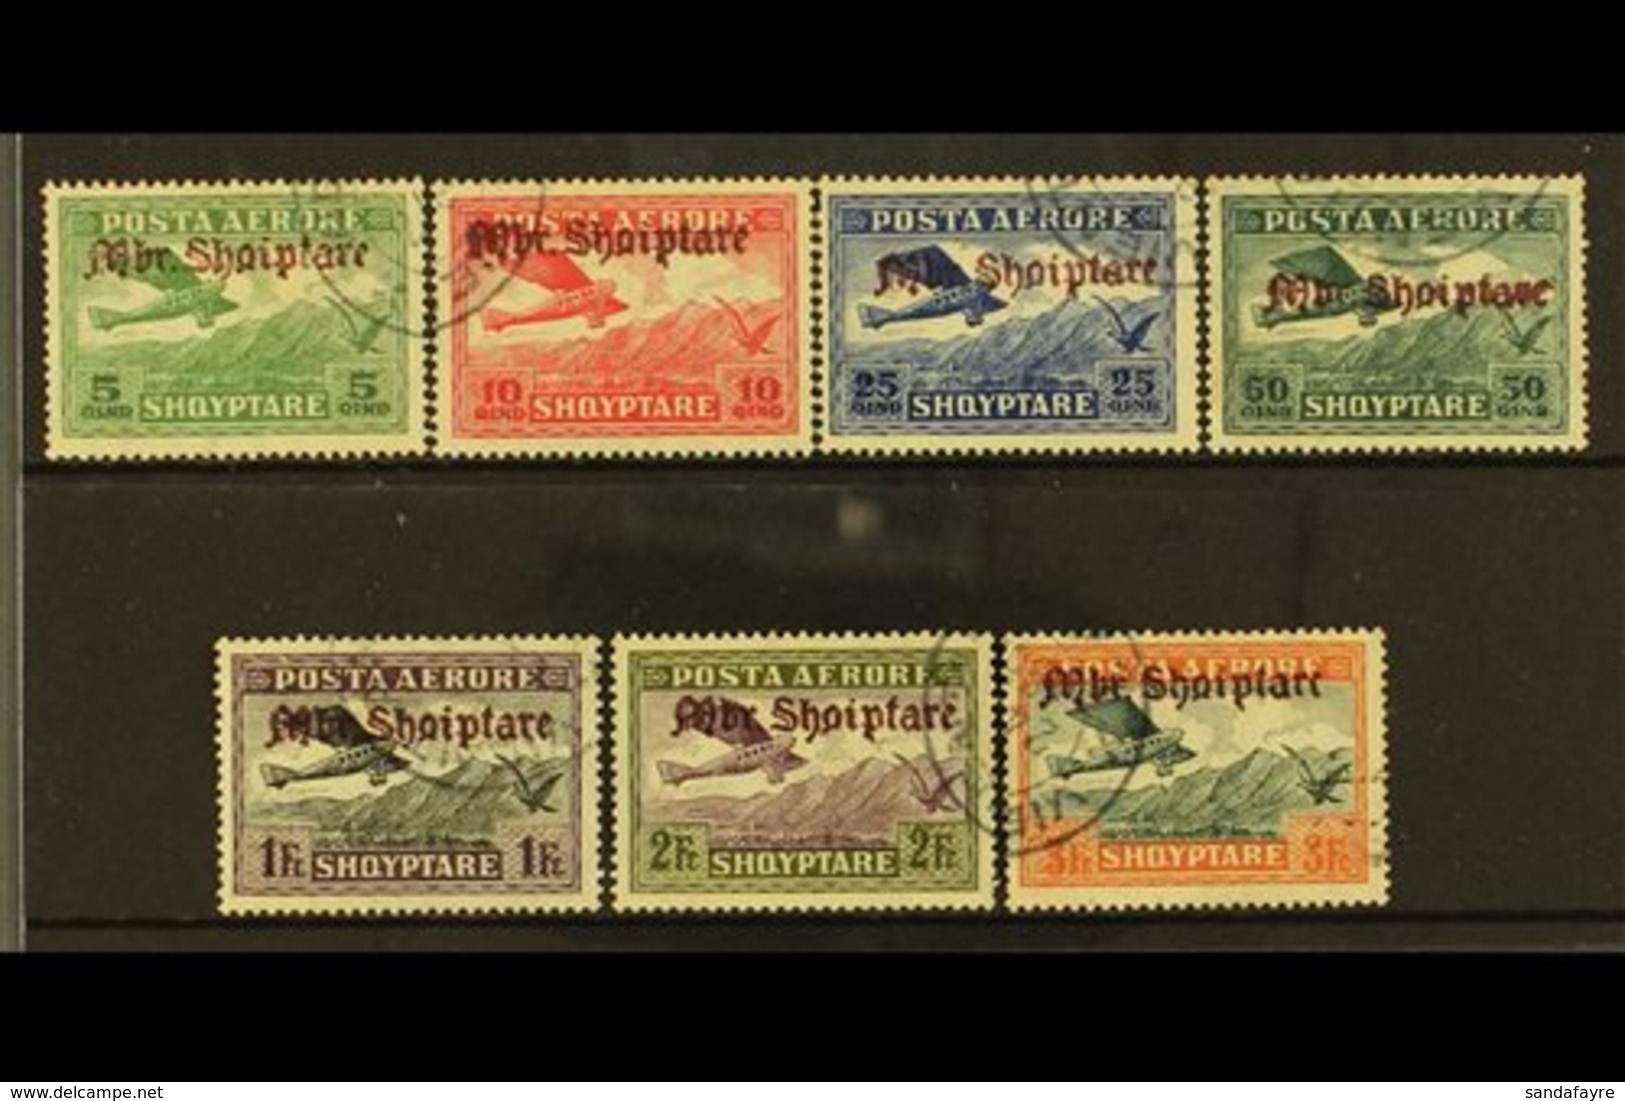 1929  Air "Mbr. Shqiptare" Overprints Complete Set (Michel 210/16, SG 270/76), Very Fine Used, Fresh & Scarce, Cat £1,80 - Albanie